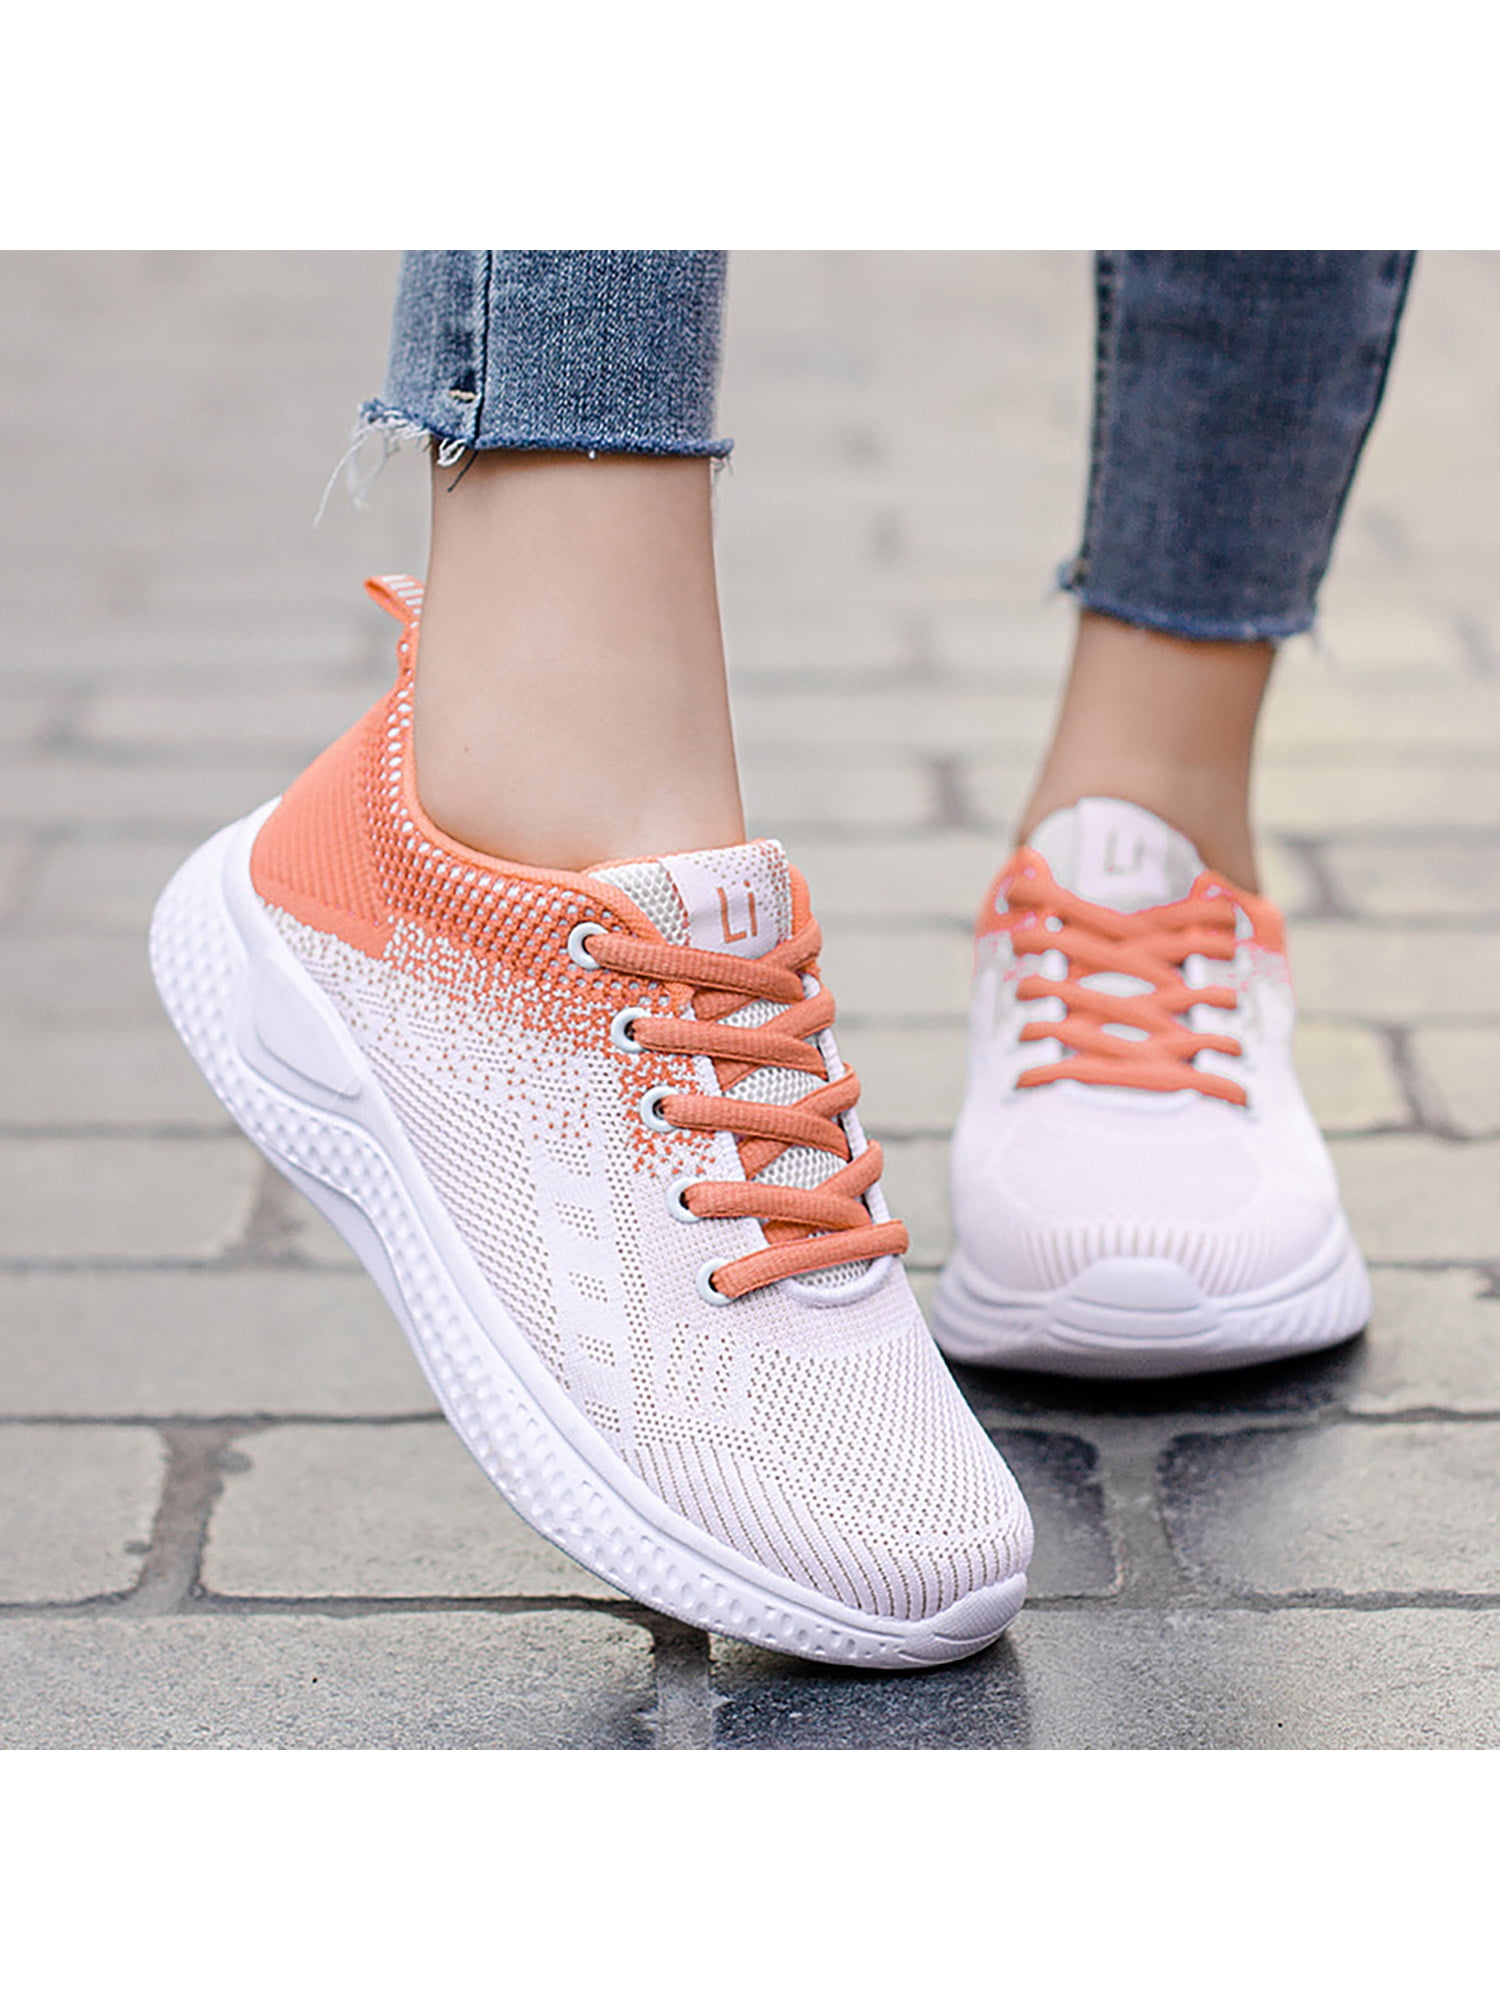 Details about   New Mesh Sports Casual Shoes Running Shoes Breathable Shoes Non-Slip Sneakers 